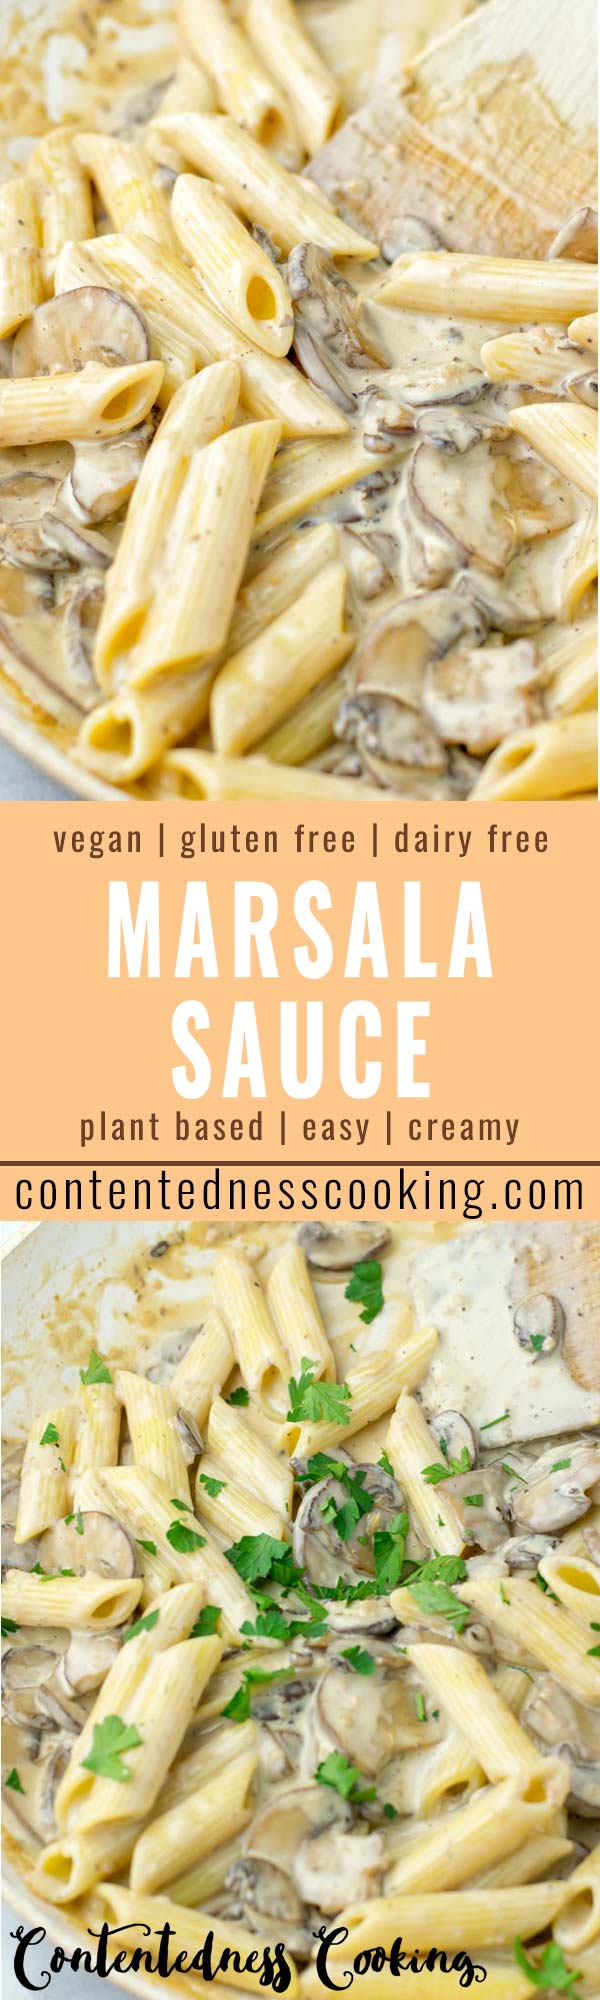 This Marsala Sauce is the only recipe you’ll ever need! It is creamy, satisfying and no one would ever guess it is vegan. So amazing for dinner lunch, mealprep, work lunch ideas and more. Delicious over pasta, rice, potatoes and quinoa. #vegan #dairyfree #glutenfree #vegetarian #dinner #lunch #mealprep #contentednesscooking #marsalasauce 